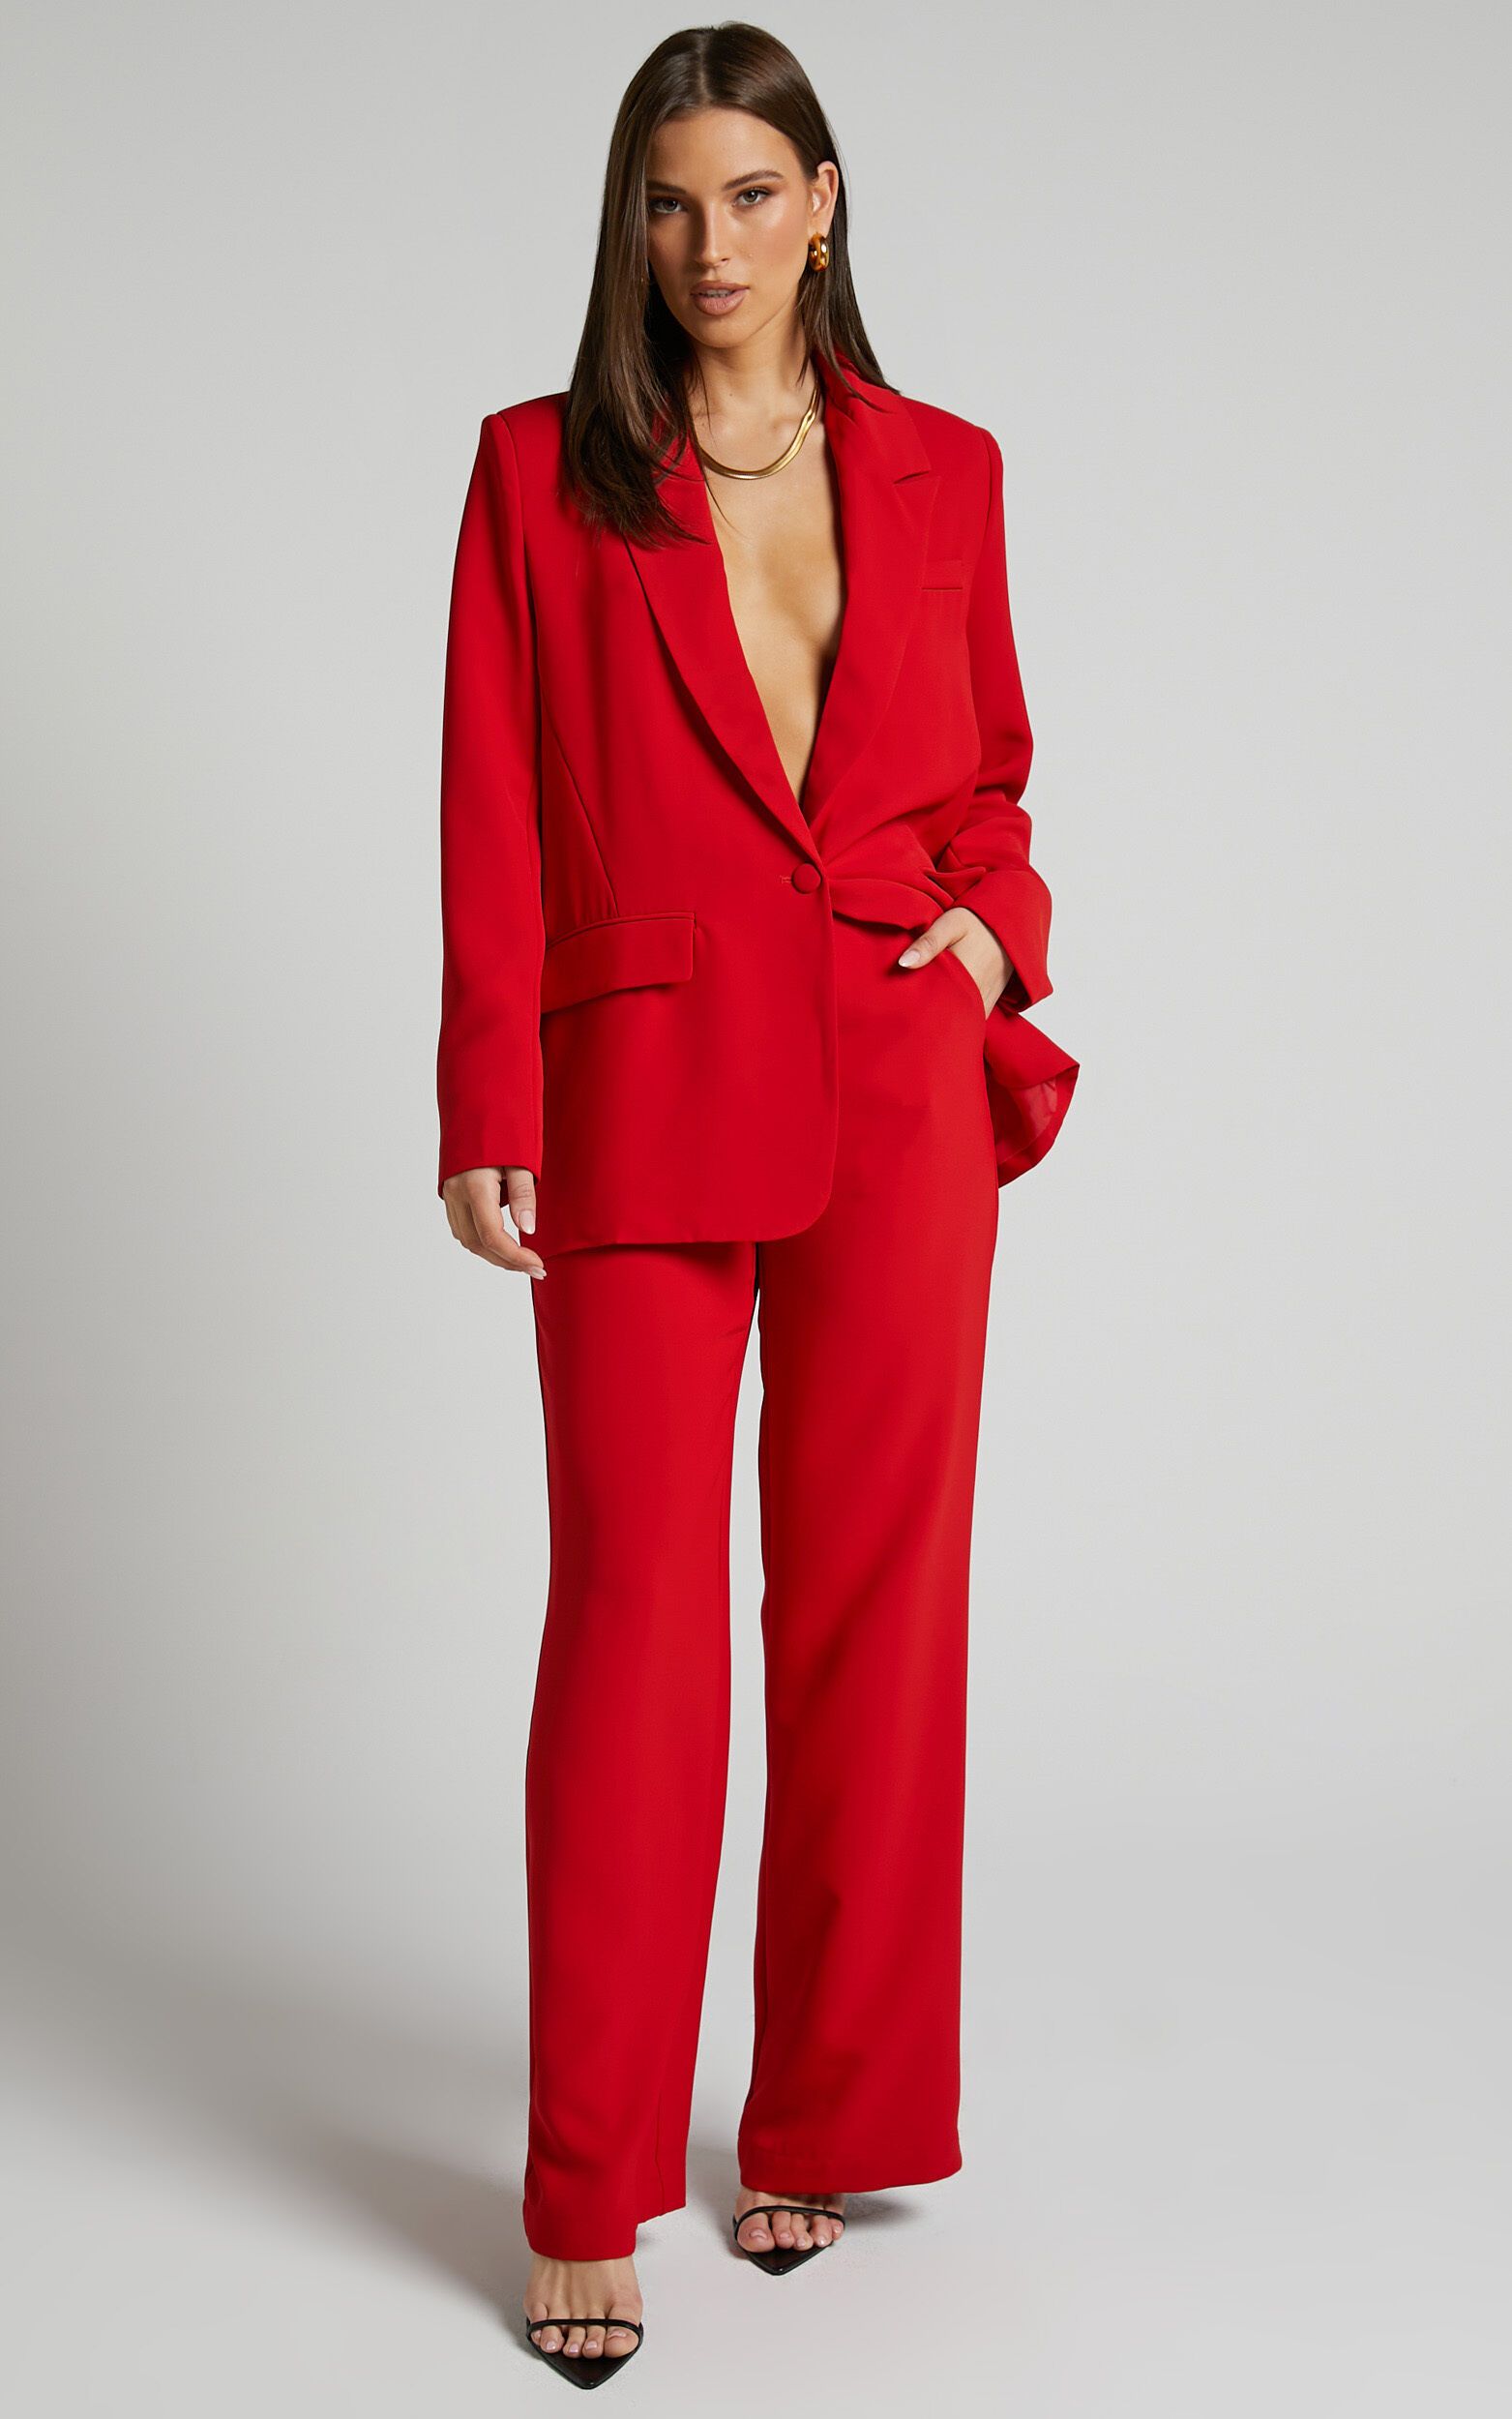 Bonnie Pants - High Waisted Tailored Wide Leg Pants in Red | Showpo (US, UK & Europe)